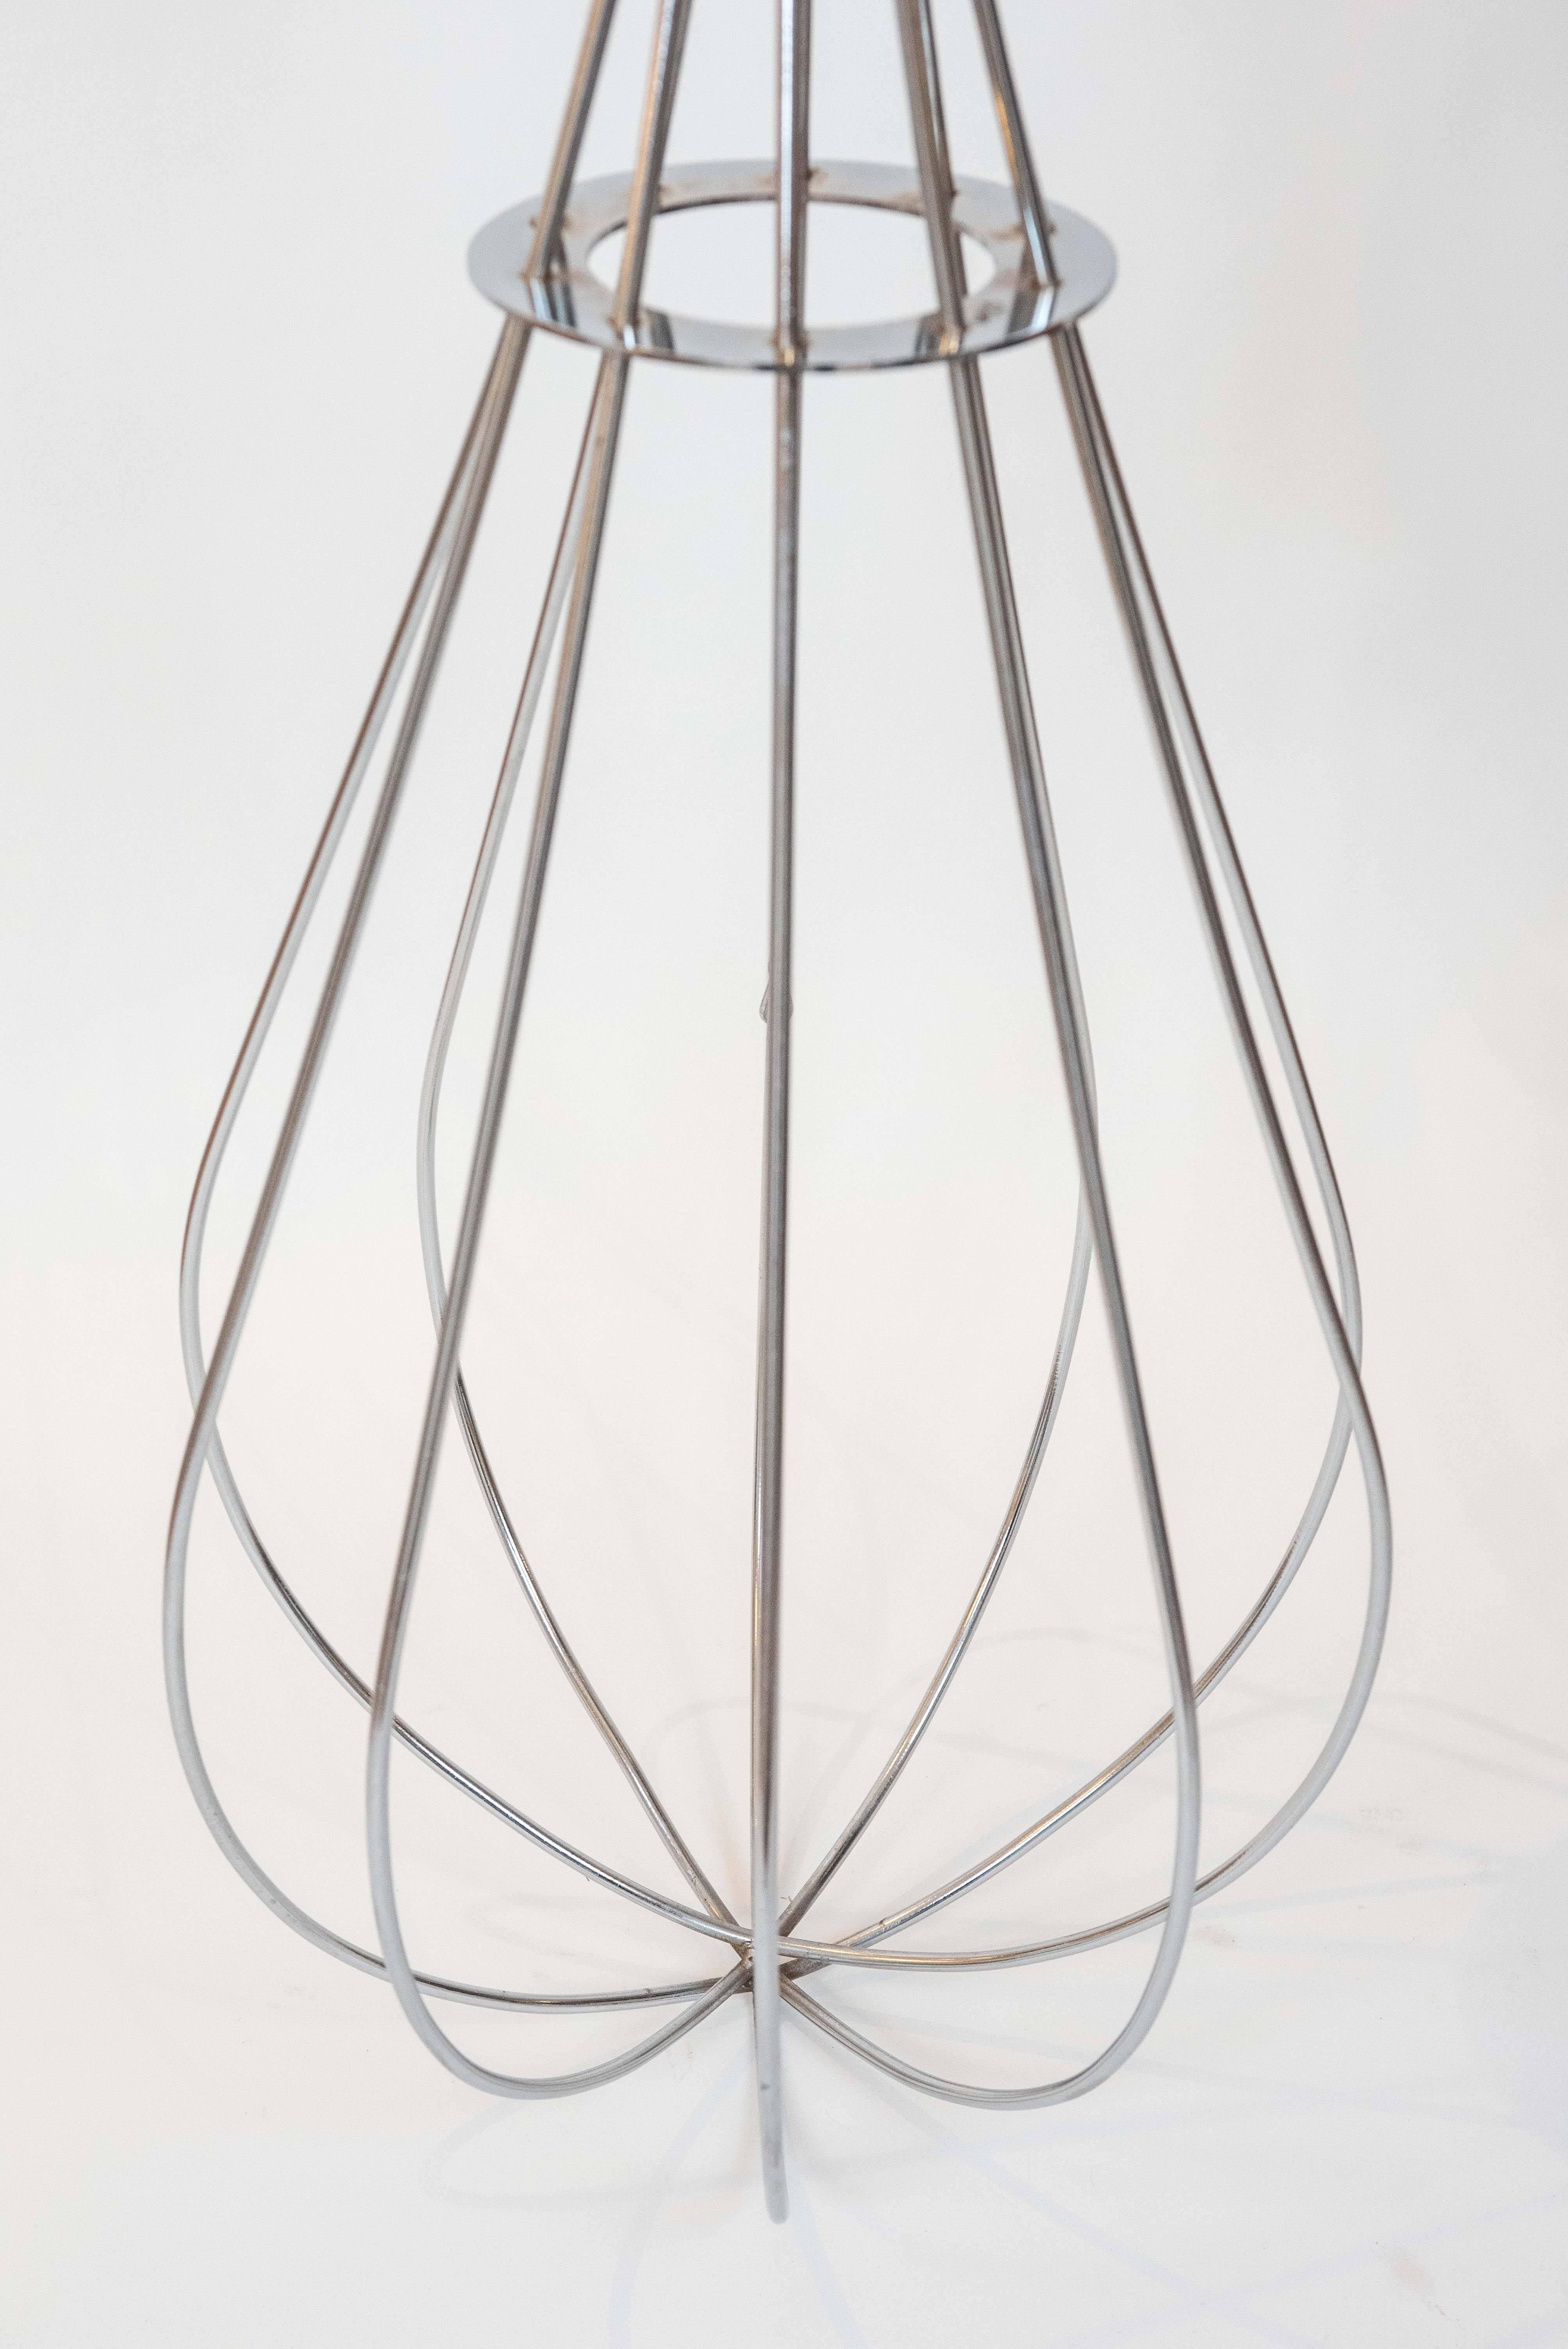 This whimsical giant whisk
is part of a collection of large
kitchen utensils by Curtis Jere 
manufactured in the late 1970s.
We also have the colander!